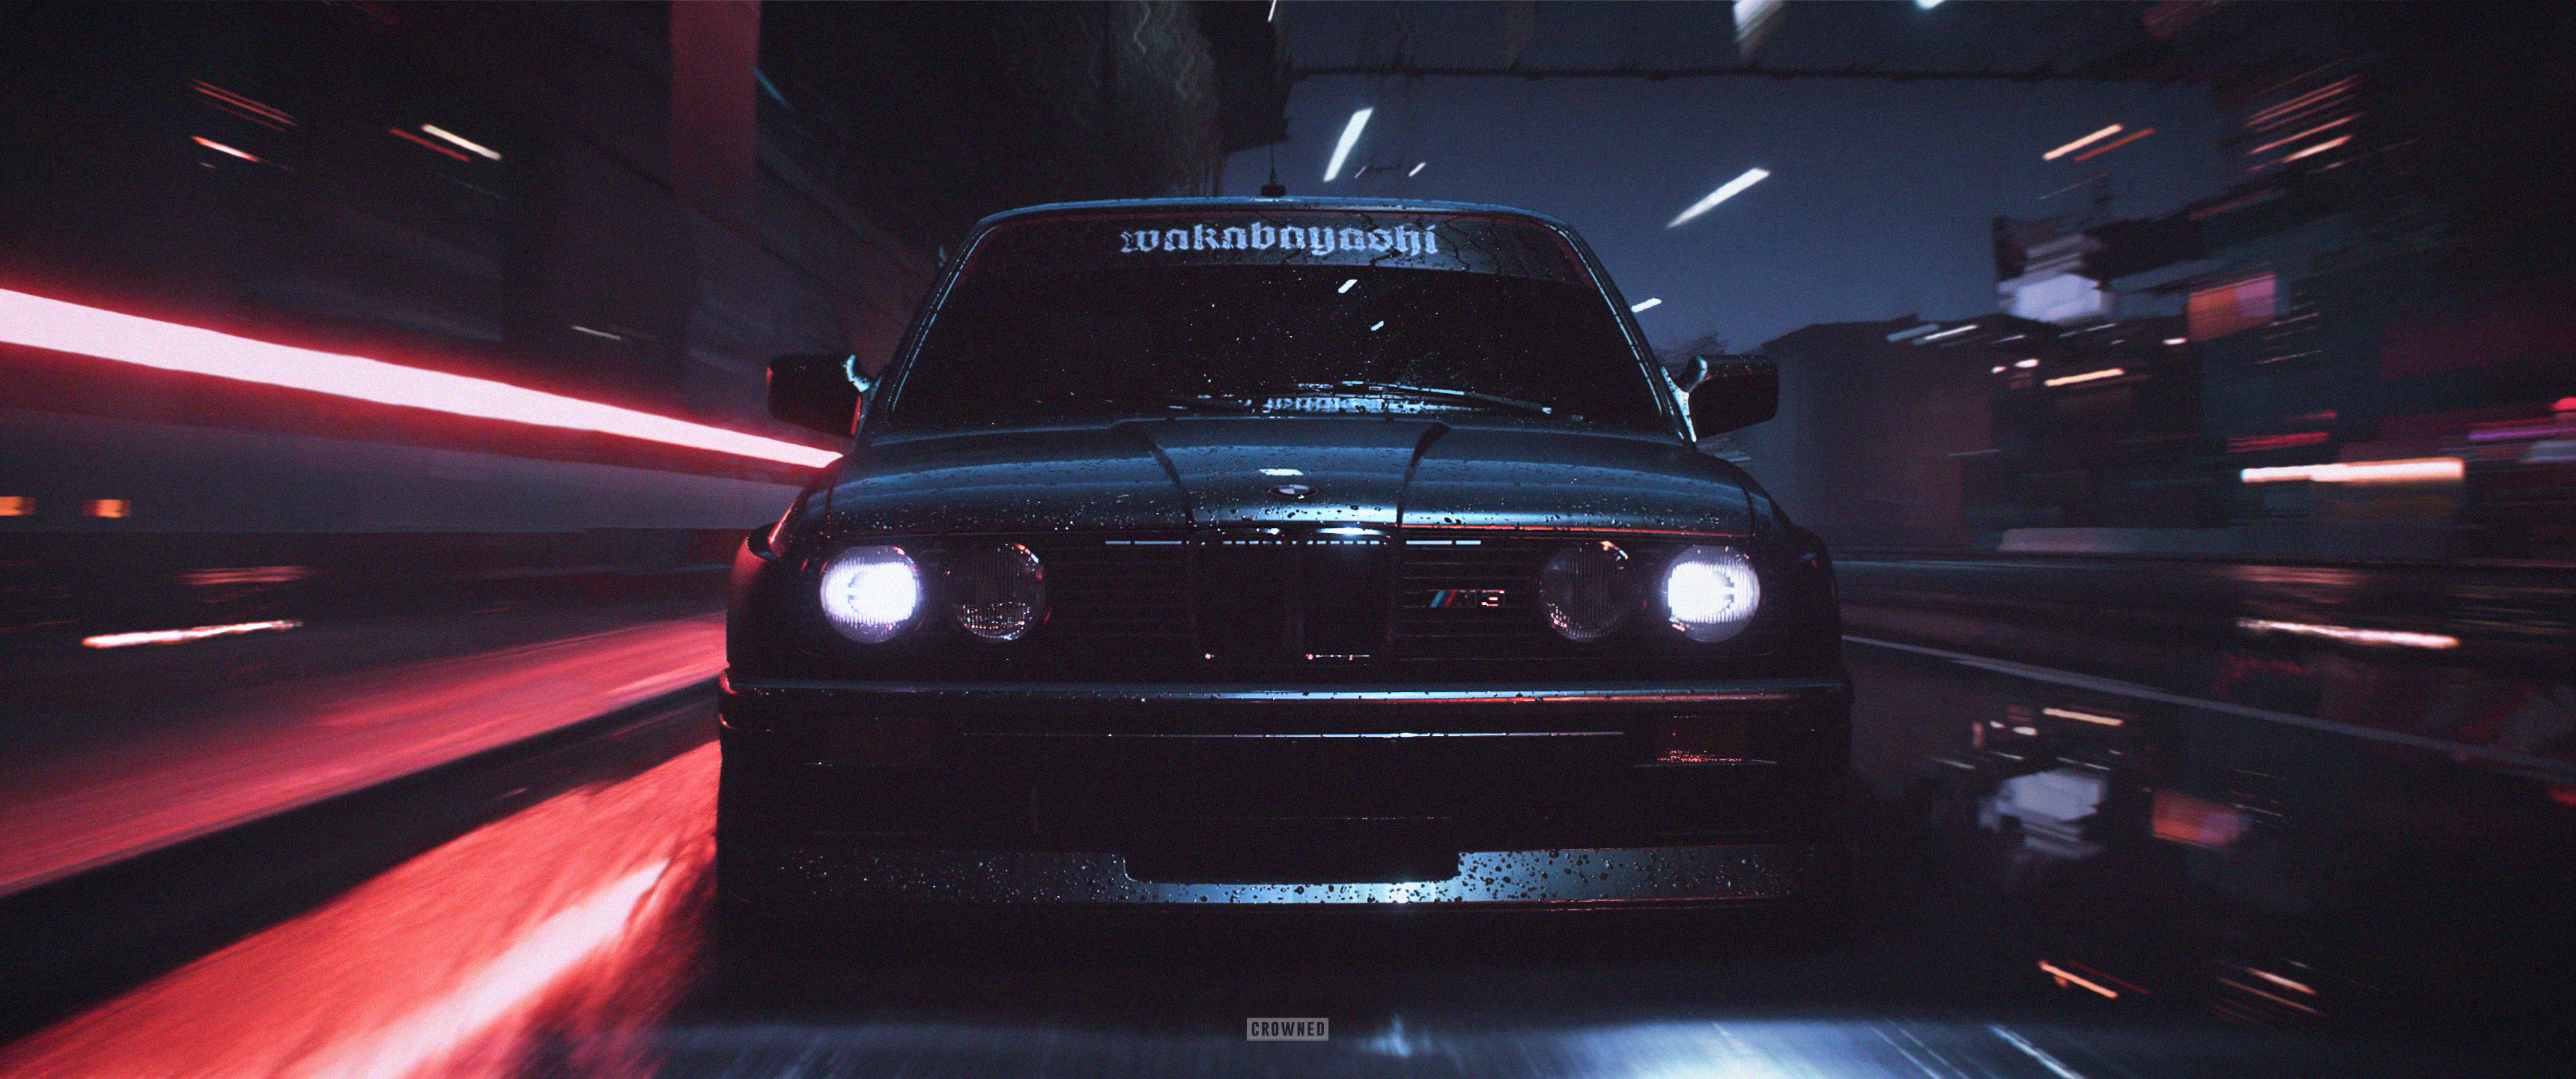 Need For Speed Payback E30 , HD Wallpaper & Backgrounds